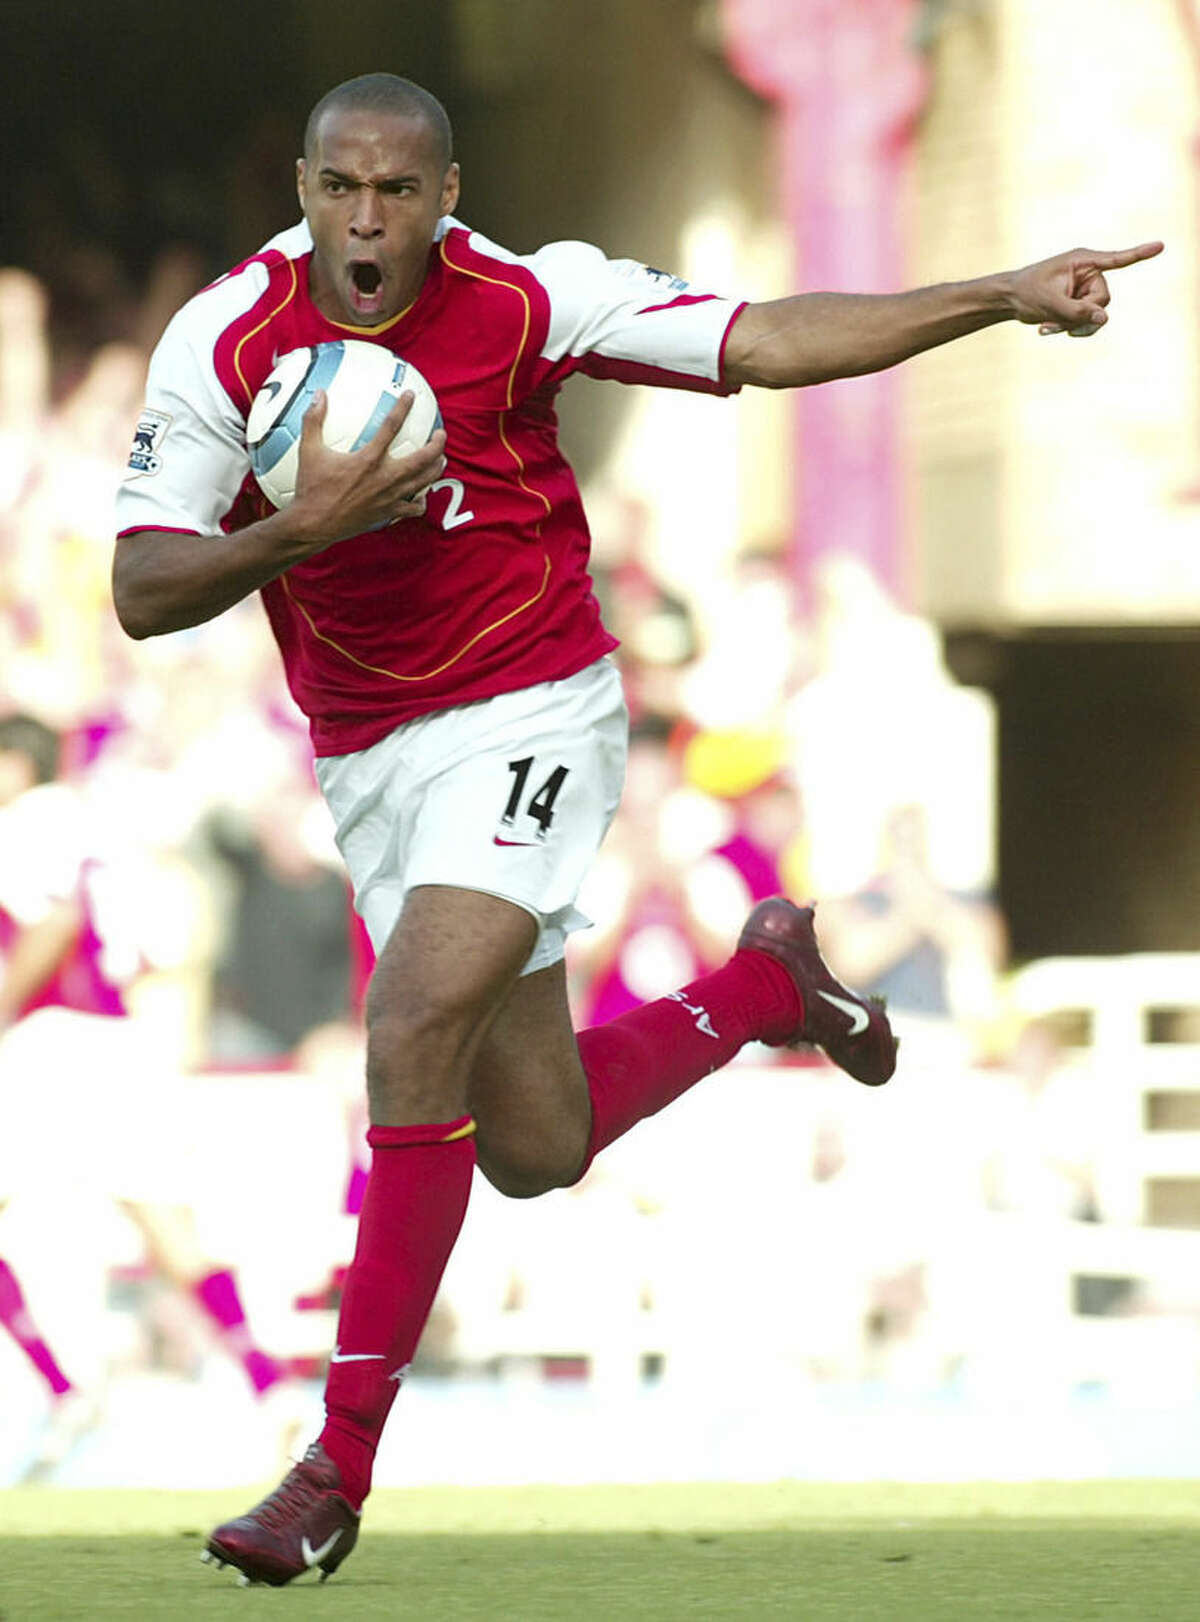 FILE - In this Sunday, Aug. 22, 2004 file photo Arsenal's Thierry Henry celebrates after team mate Dennis Bergkamp scored Arsenal's third goal during the Premiership game between Arsenal and Middlesbrough at Highbury, London. Thierry Henry has announced his retirement following a 20-year career. The 37-year-old Henry, a member of the France teams that won the 1998 World Cup and 2000 European Championship, will take up a media role as a consultant for Sky Sports channel. (AP Photo/John D McHugh, File)